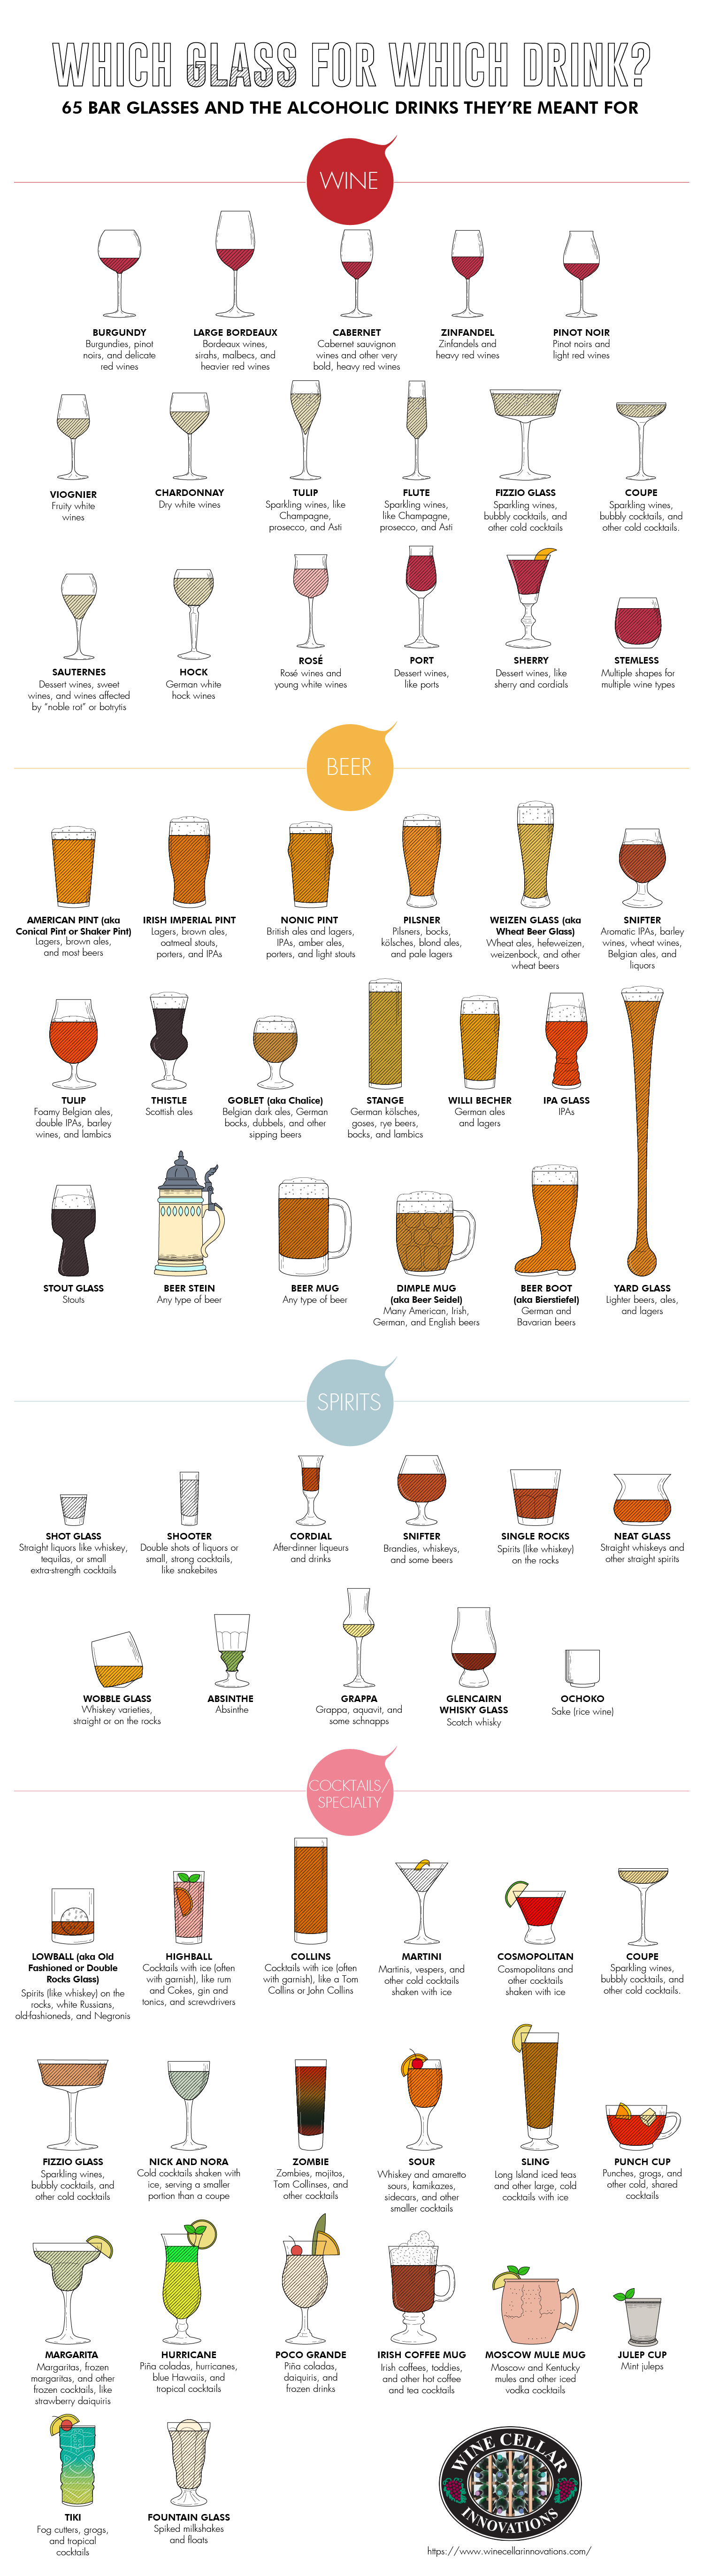 65 Bar Glasses and What For — Cool Infographics